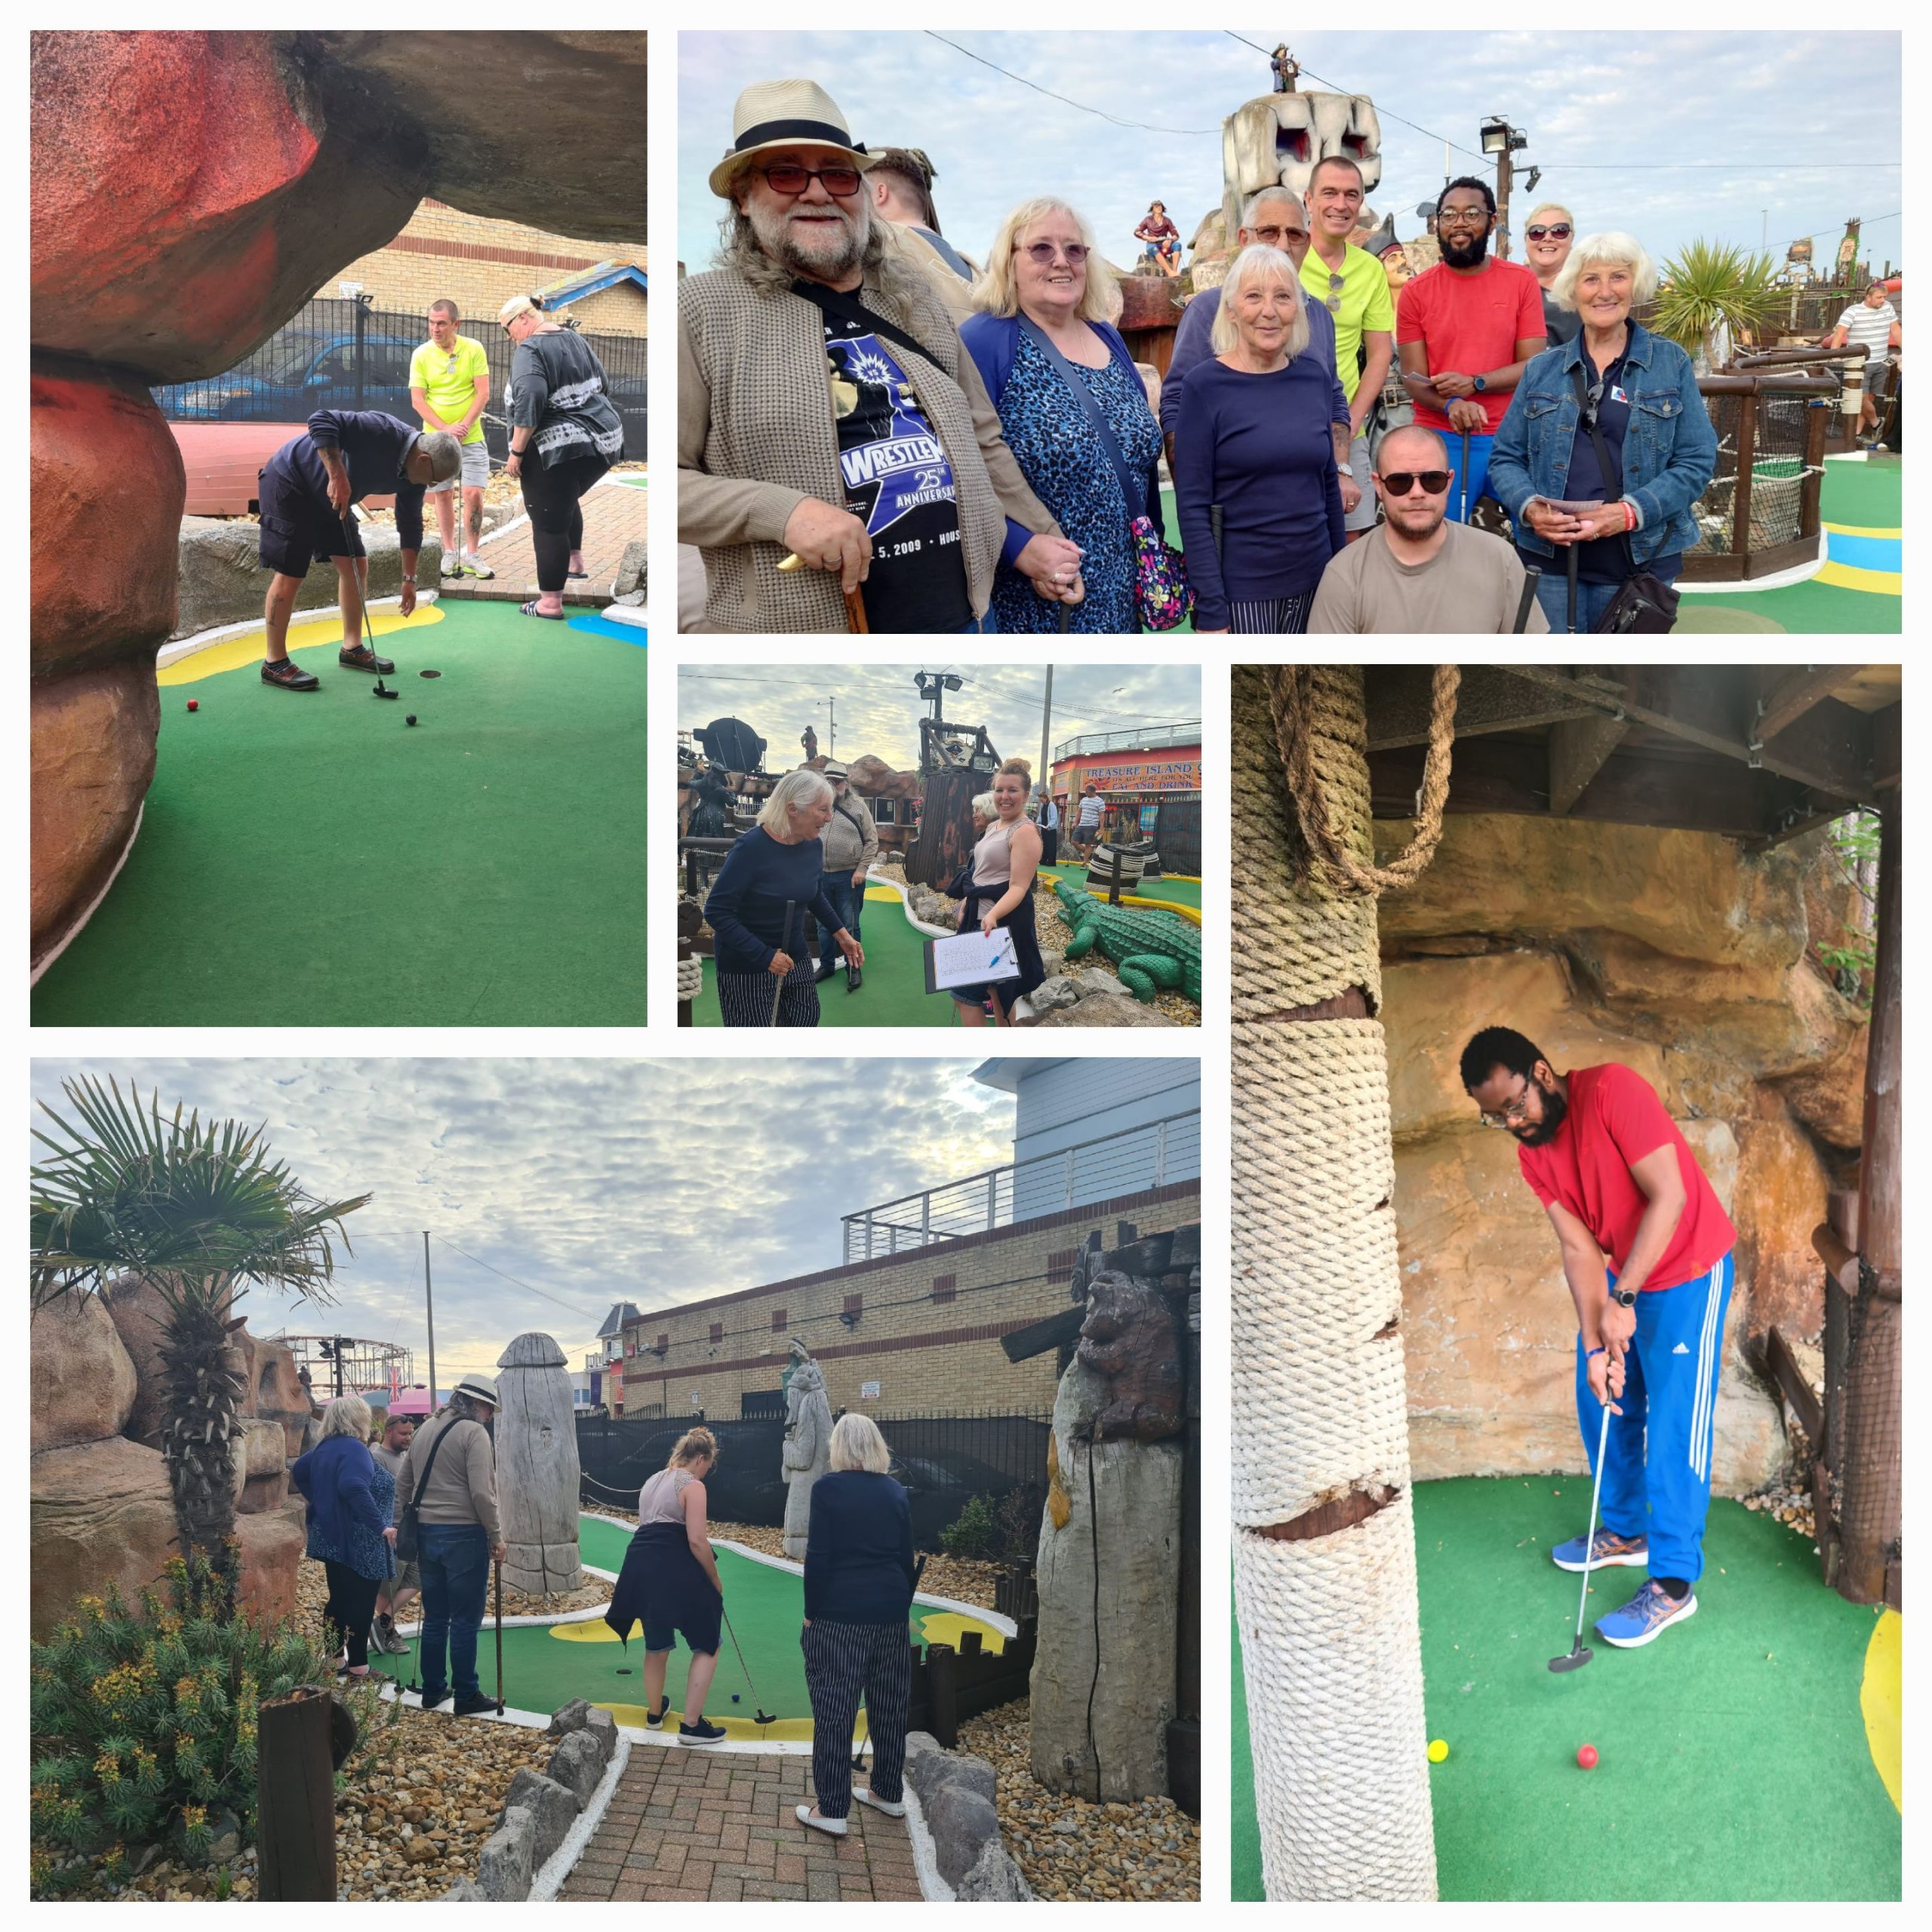 A collage of photos of people playing crazy golf | VOS